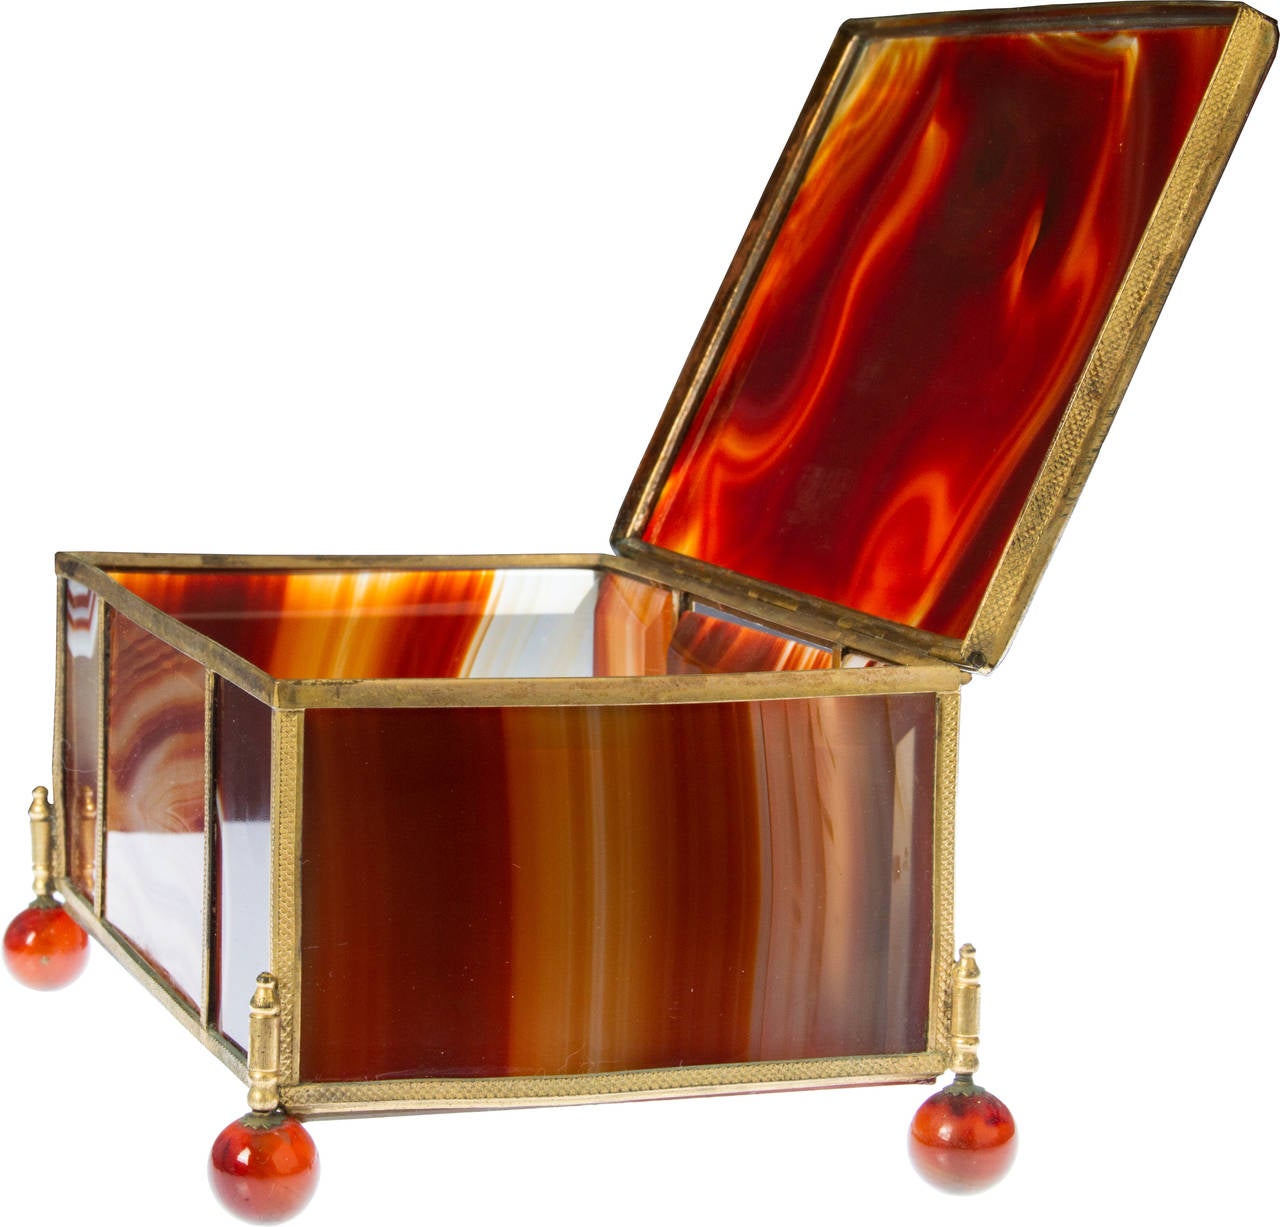 This is an unusually large agate box. The top has a beveled edge